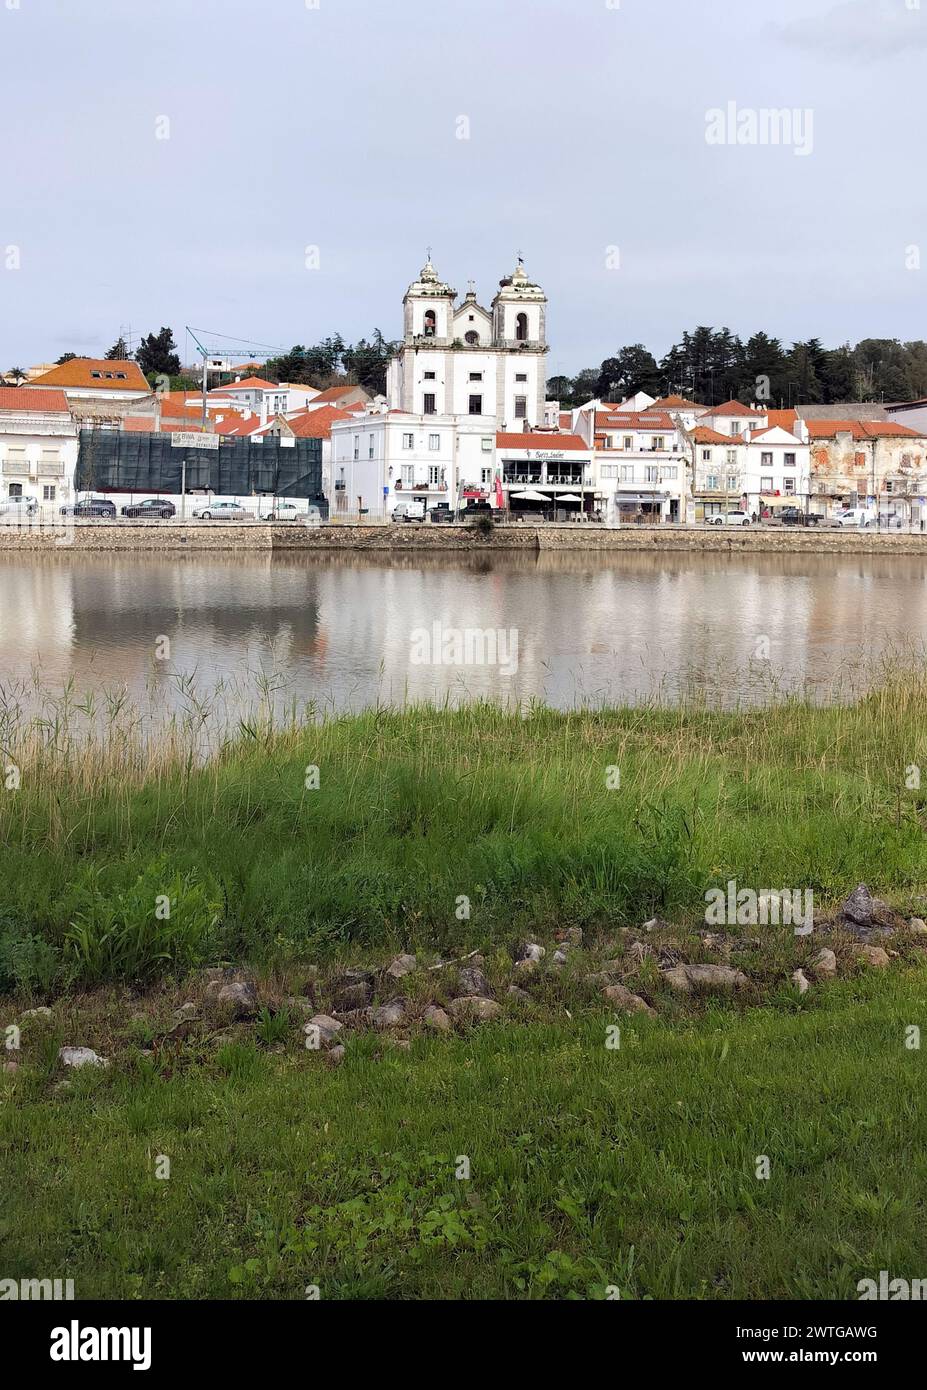 View of the town historic center across the River Sado, grassy left bank of the river in the foreground, Alcacer do Sal, Portugal Stock Photo